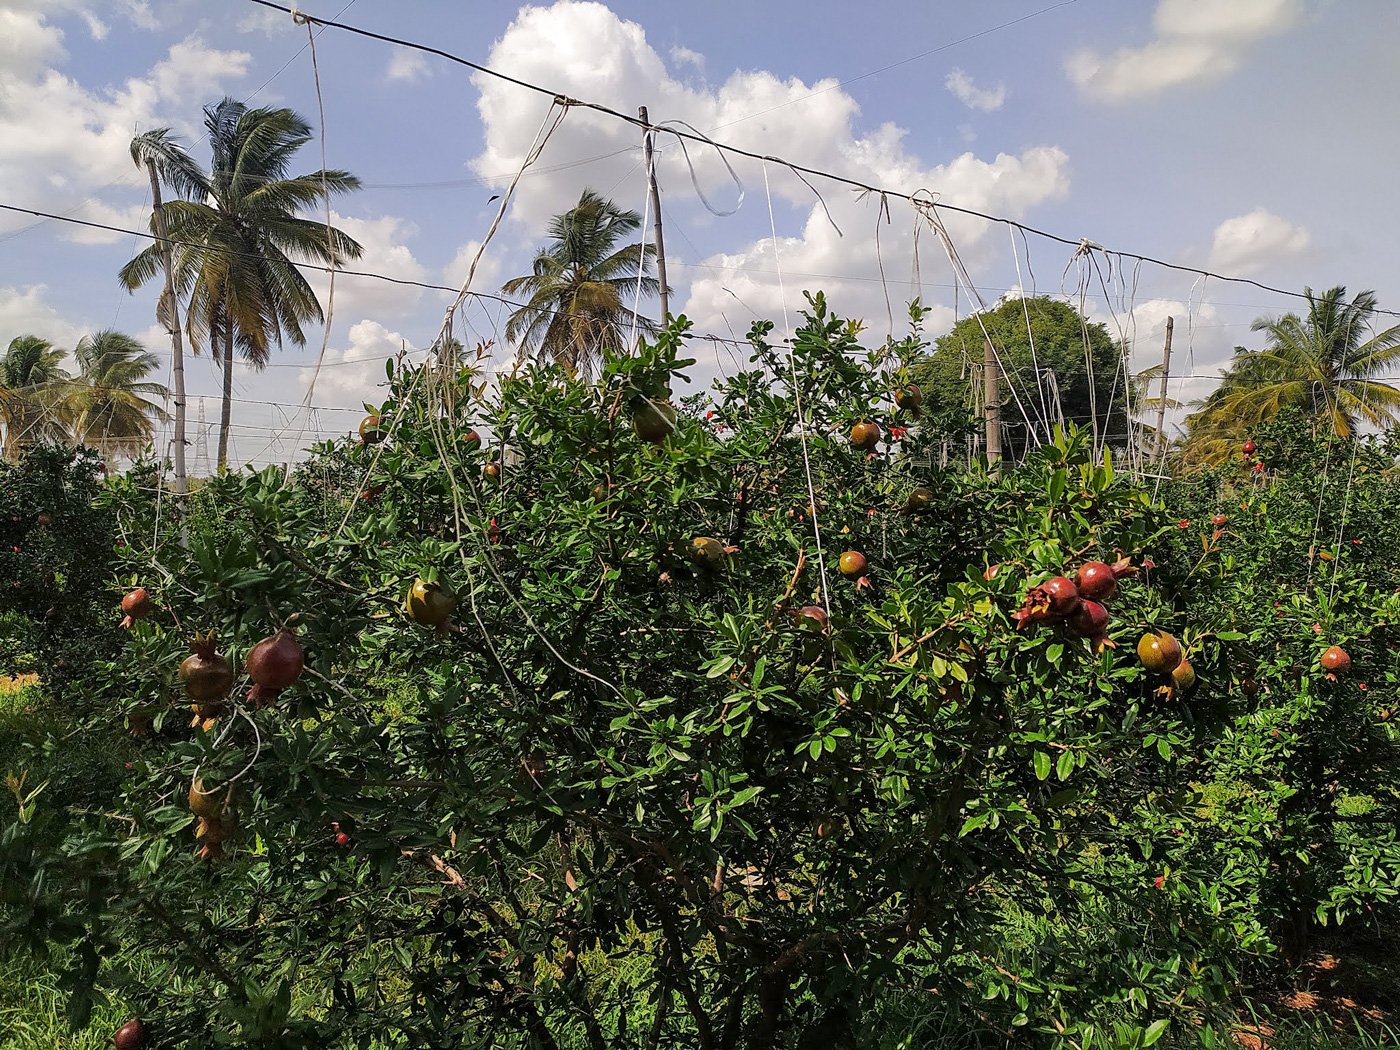 Pomegranate fruits are tied to wires above to providing support. Chethan says one pomegranate weighs 250-300 grams